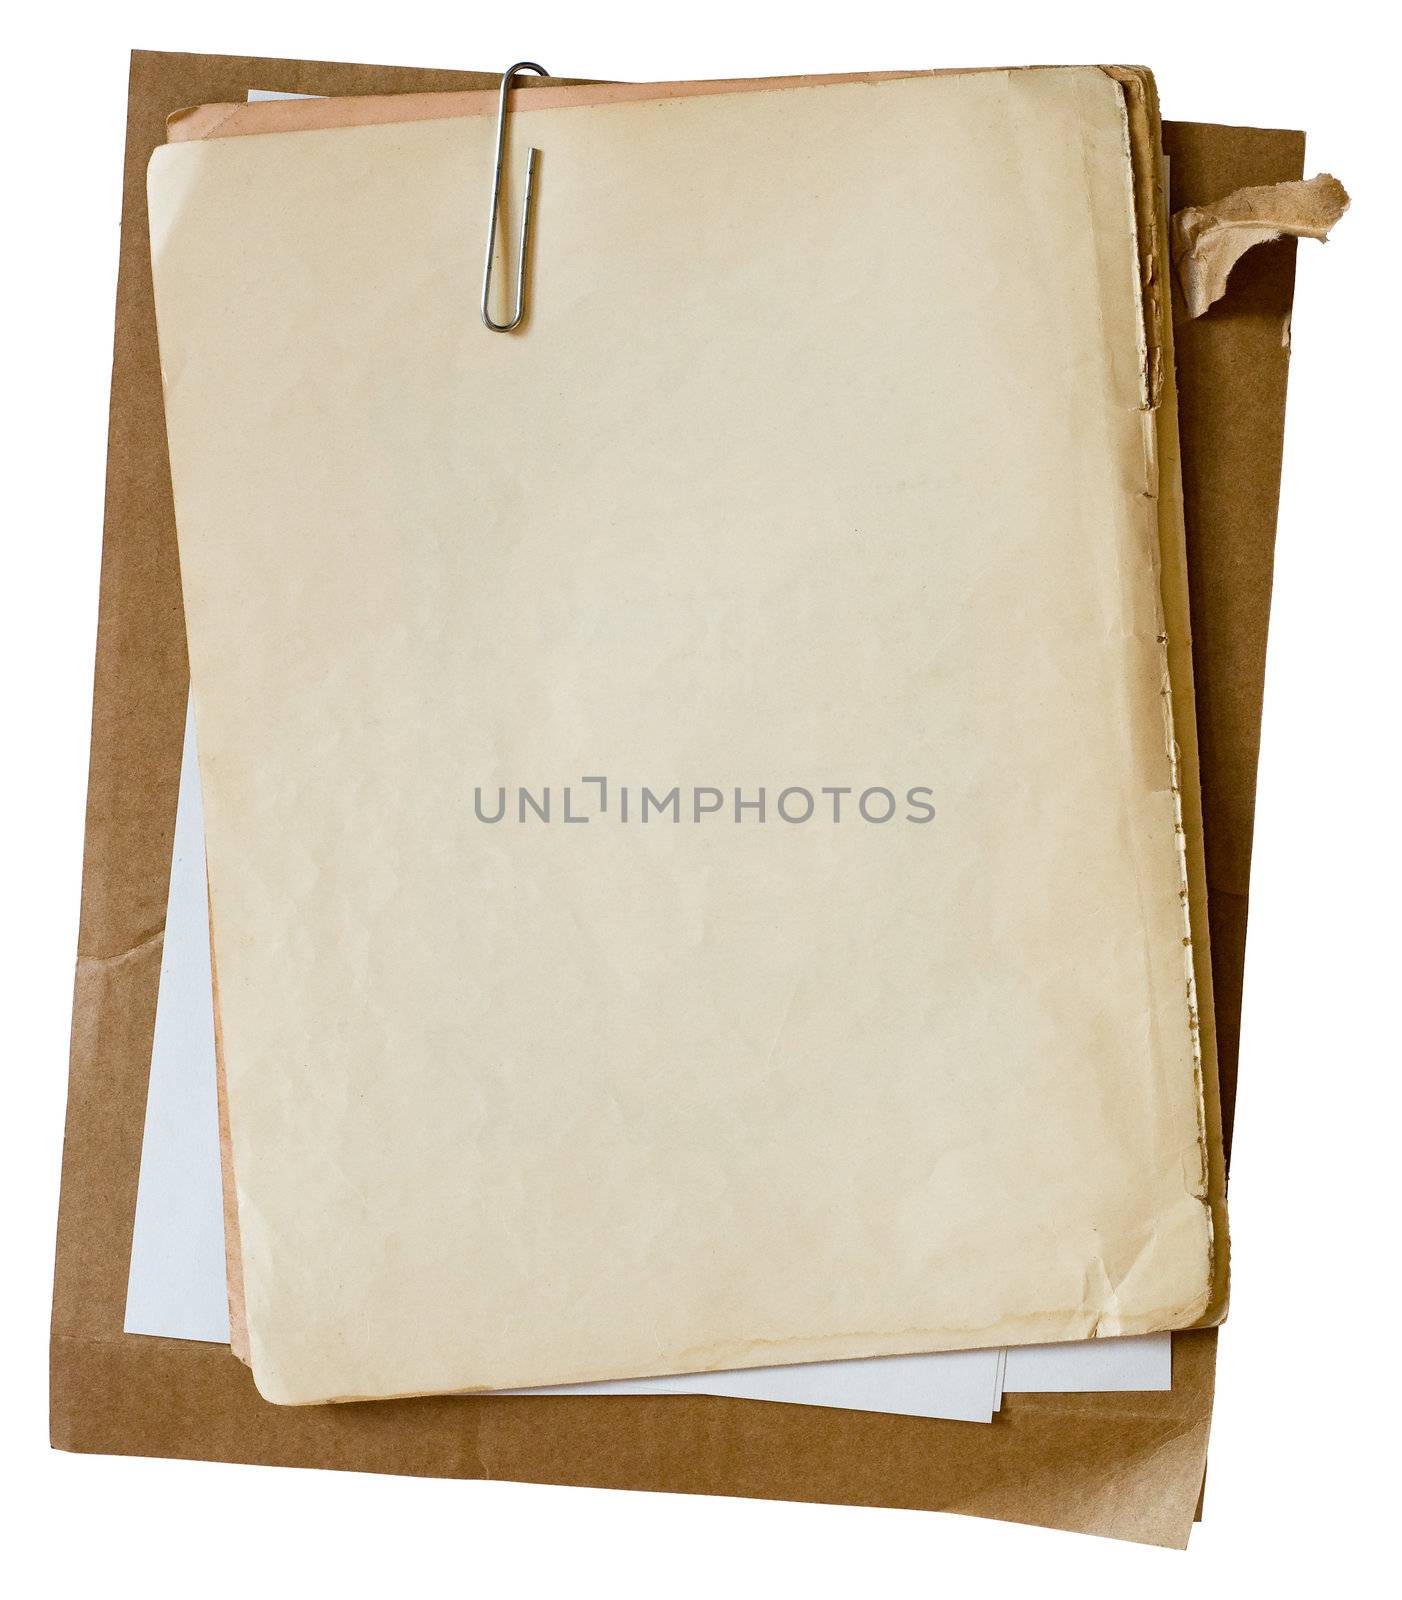 Metalic paper clip on stack of old papers. Clipping path included